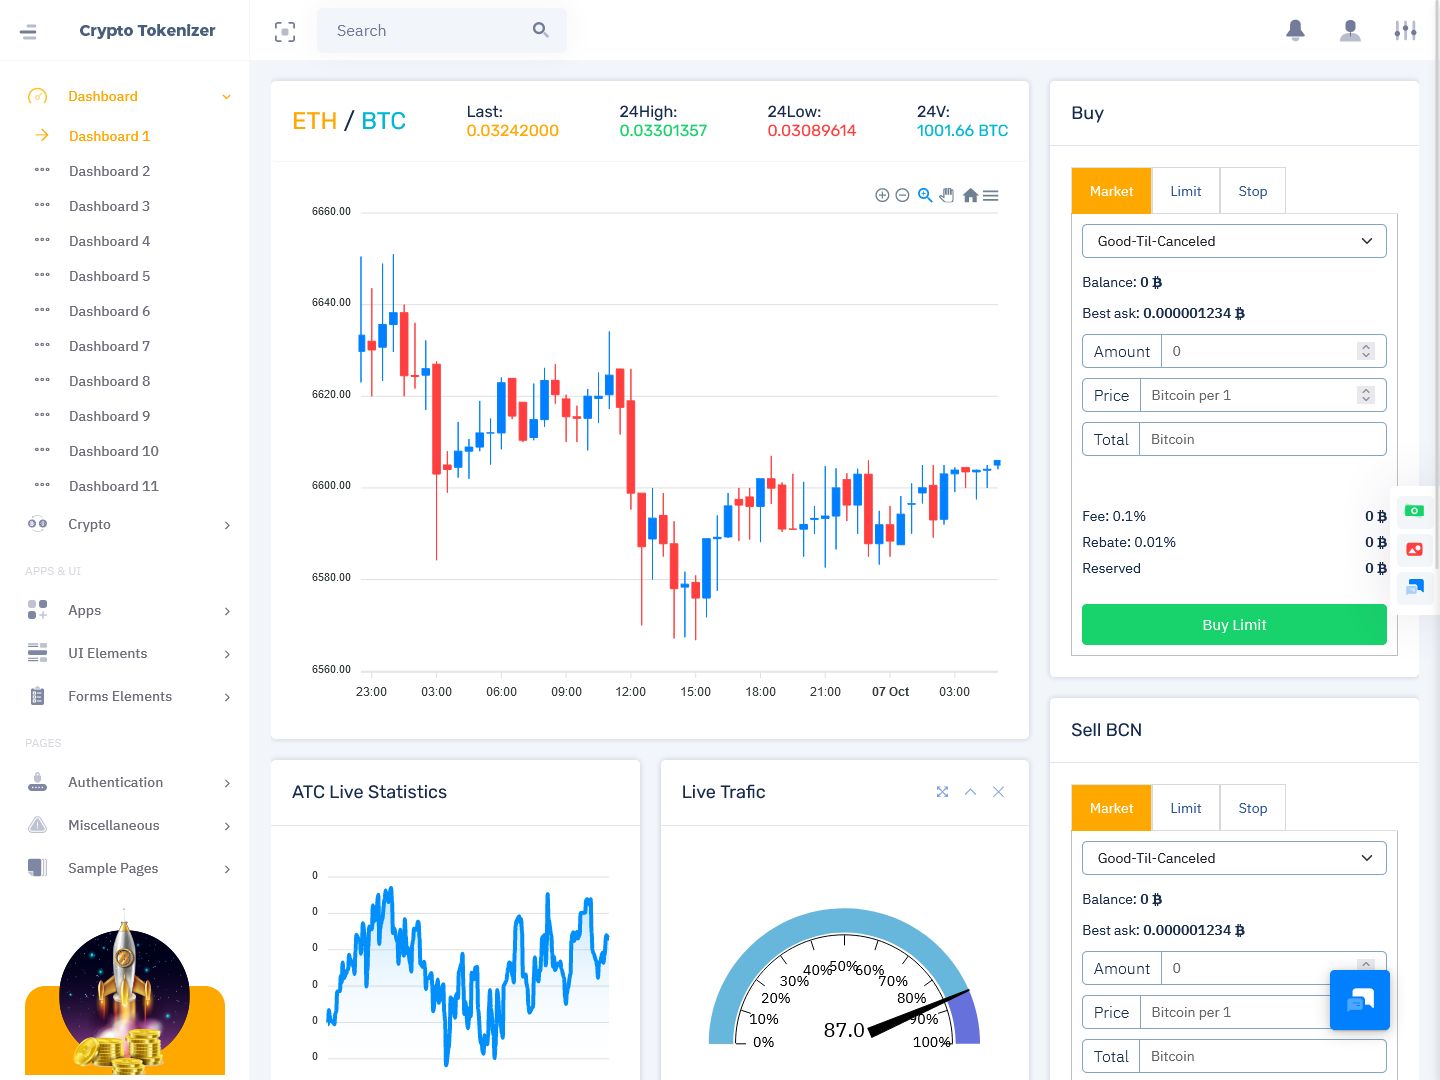 Cryptocurrency Admin Dashboard